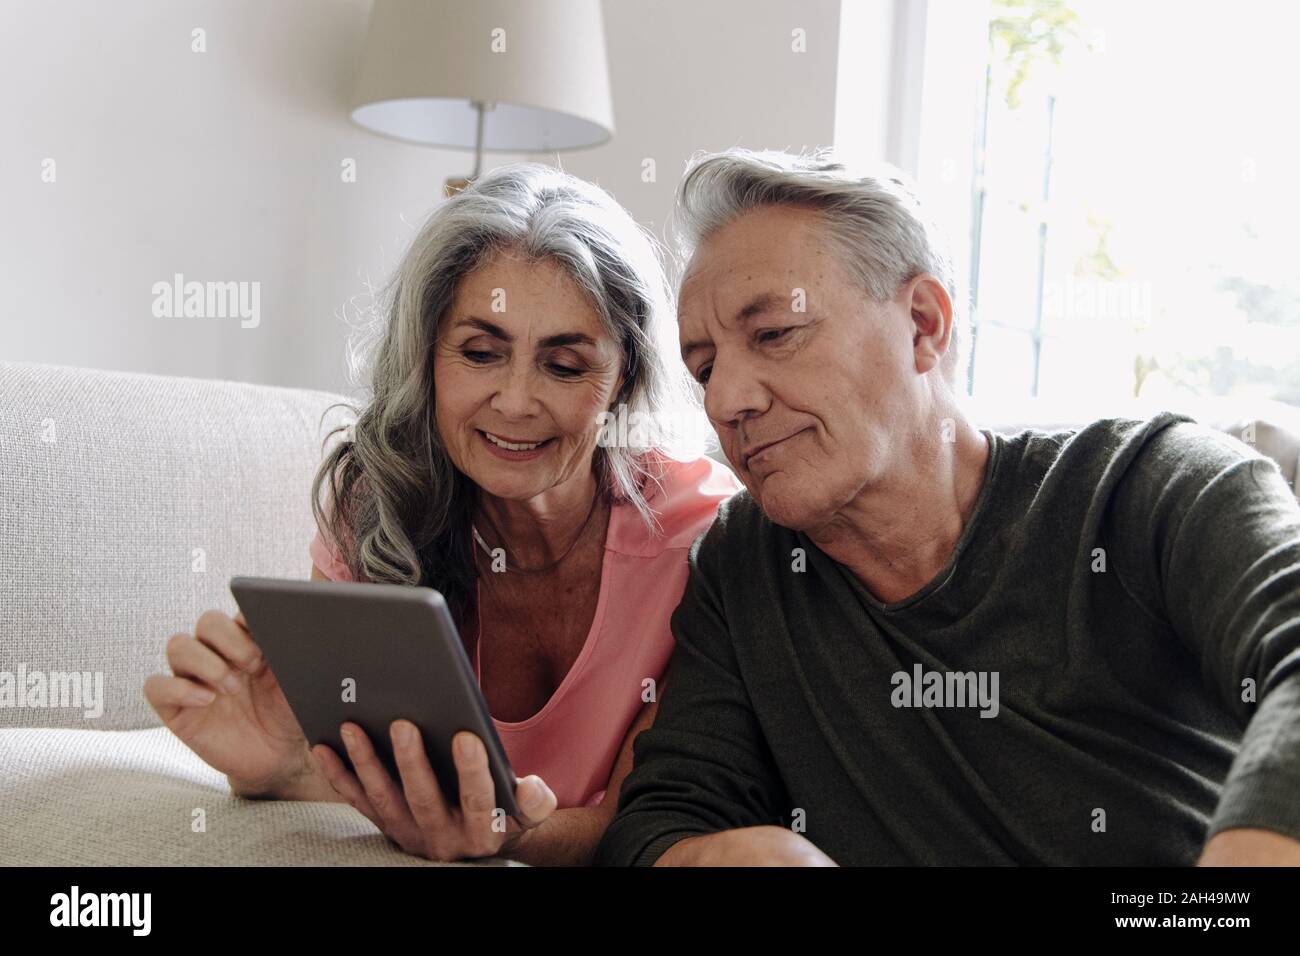 Happy senior couple relaxing at home using tablet Banque D'Images